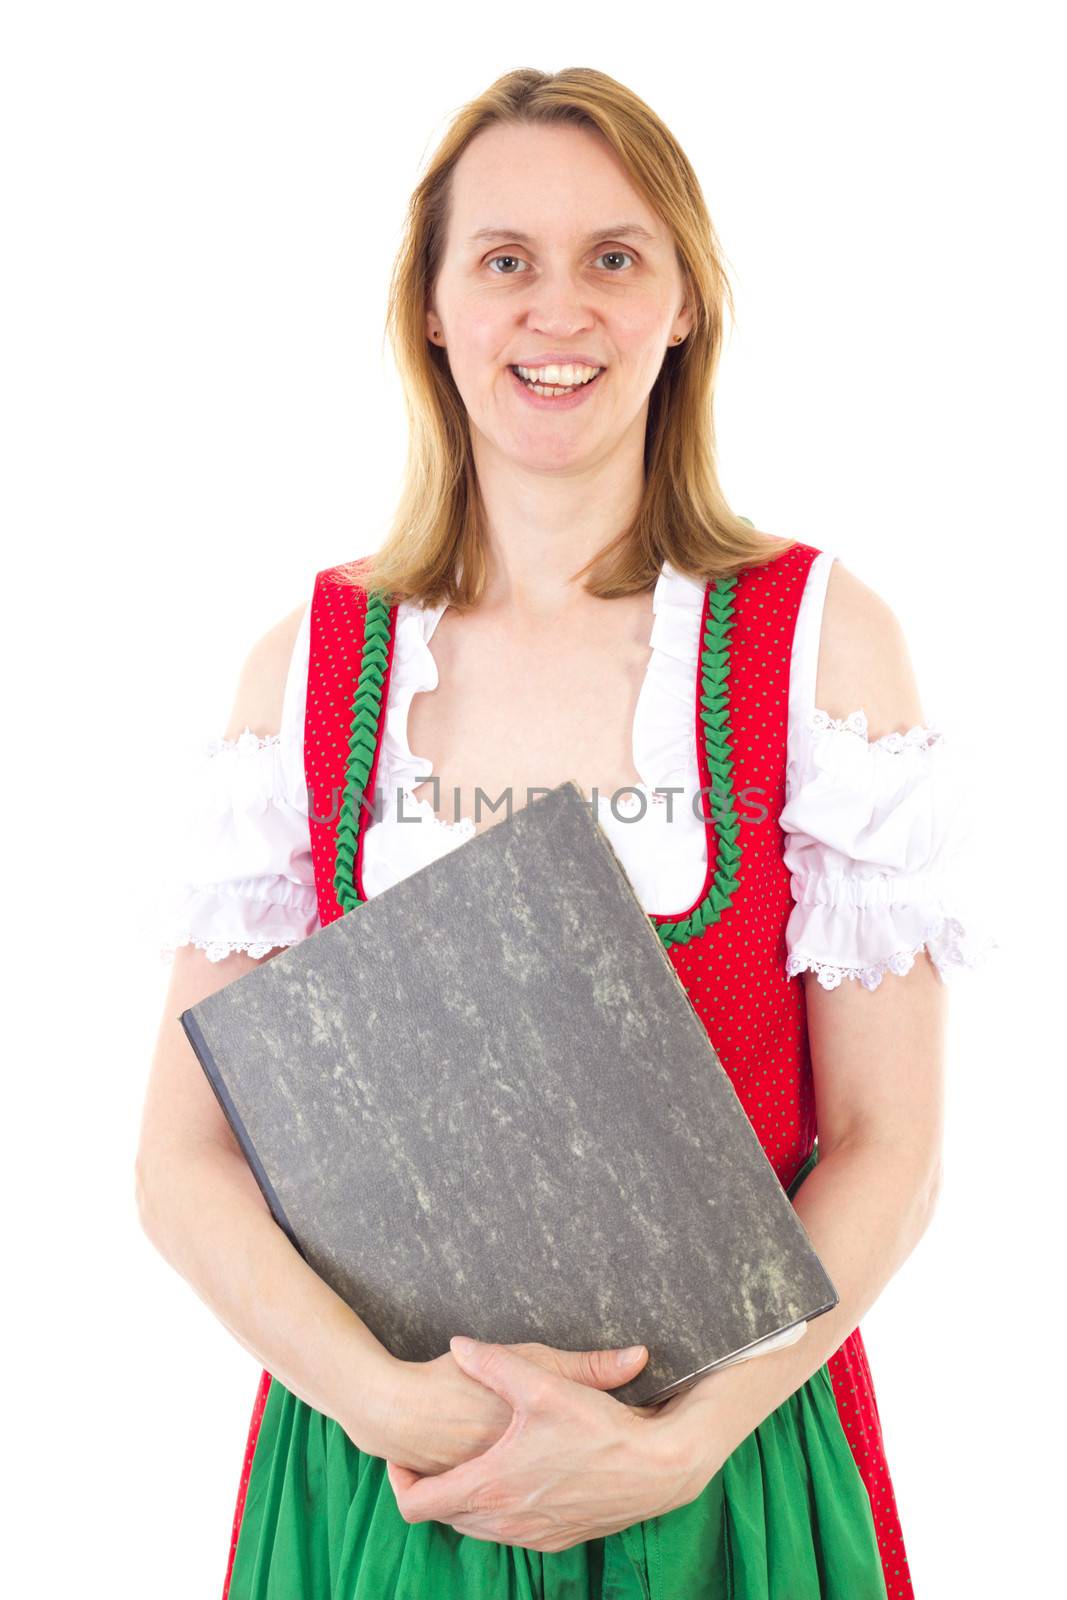 Bavarian woman with some documents